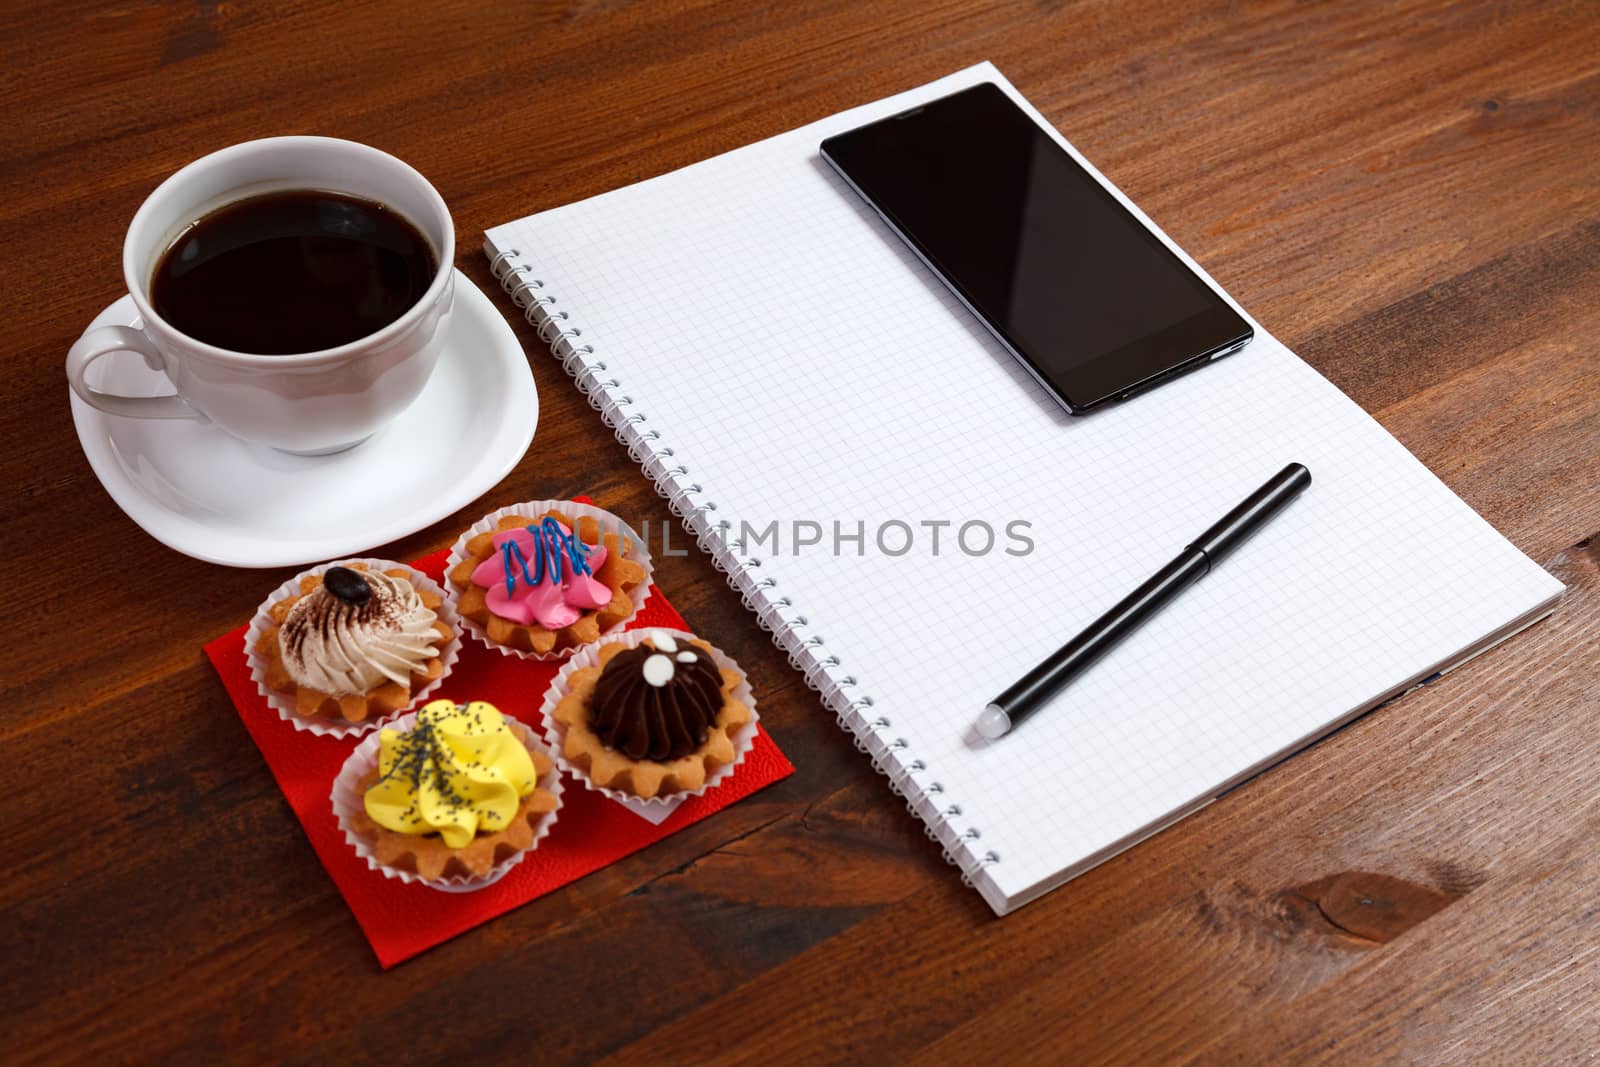 White coffee cup with notebook, four cupcakes, smartphone and pen on a wooden table.